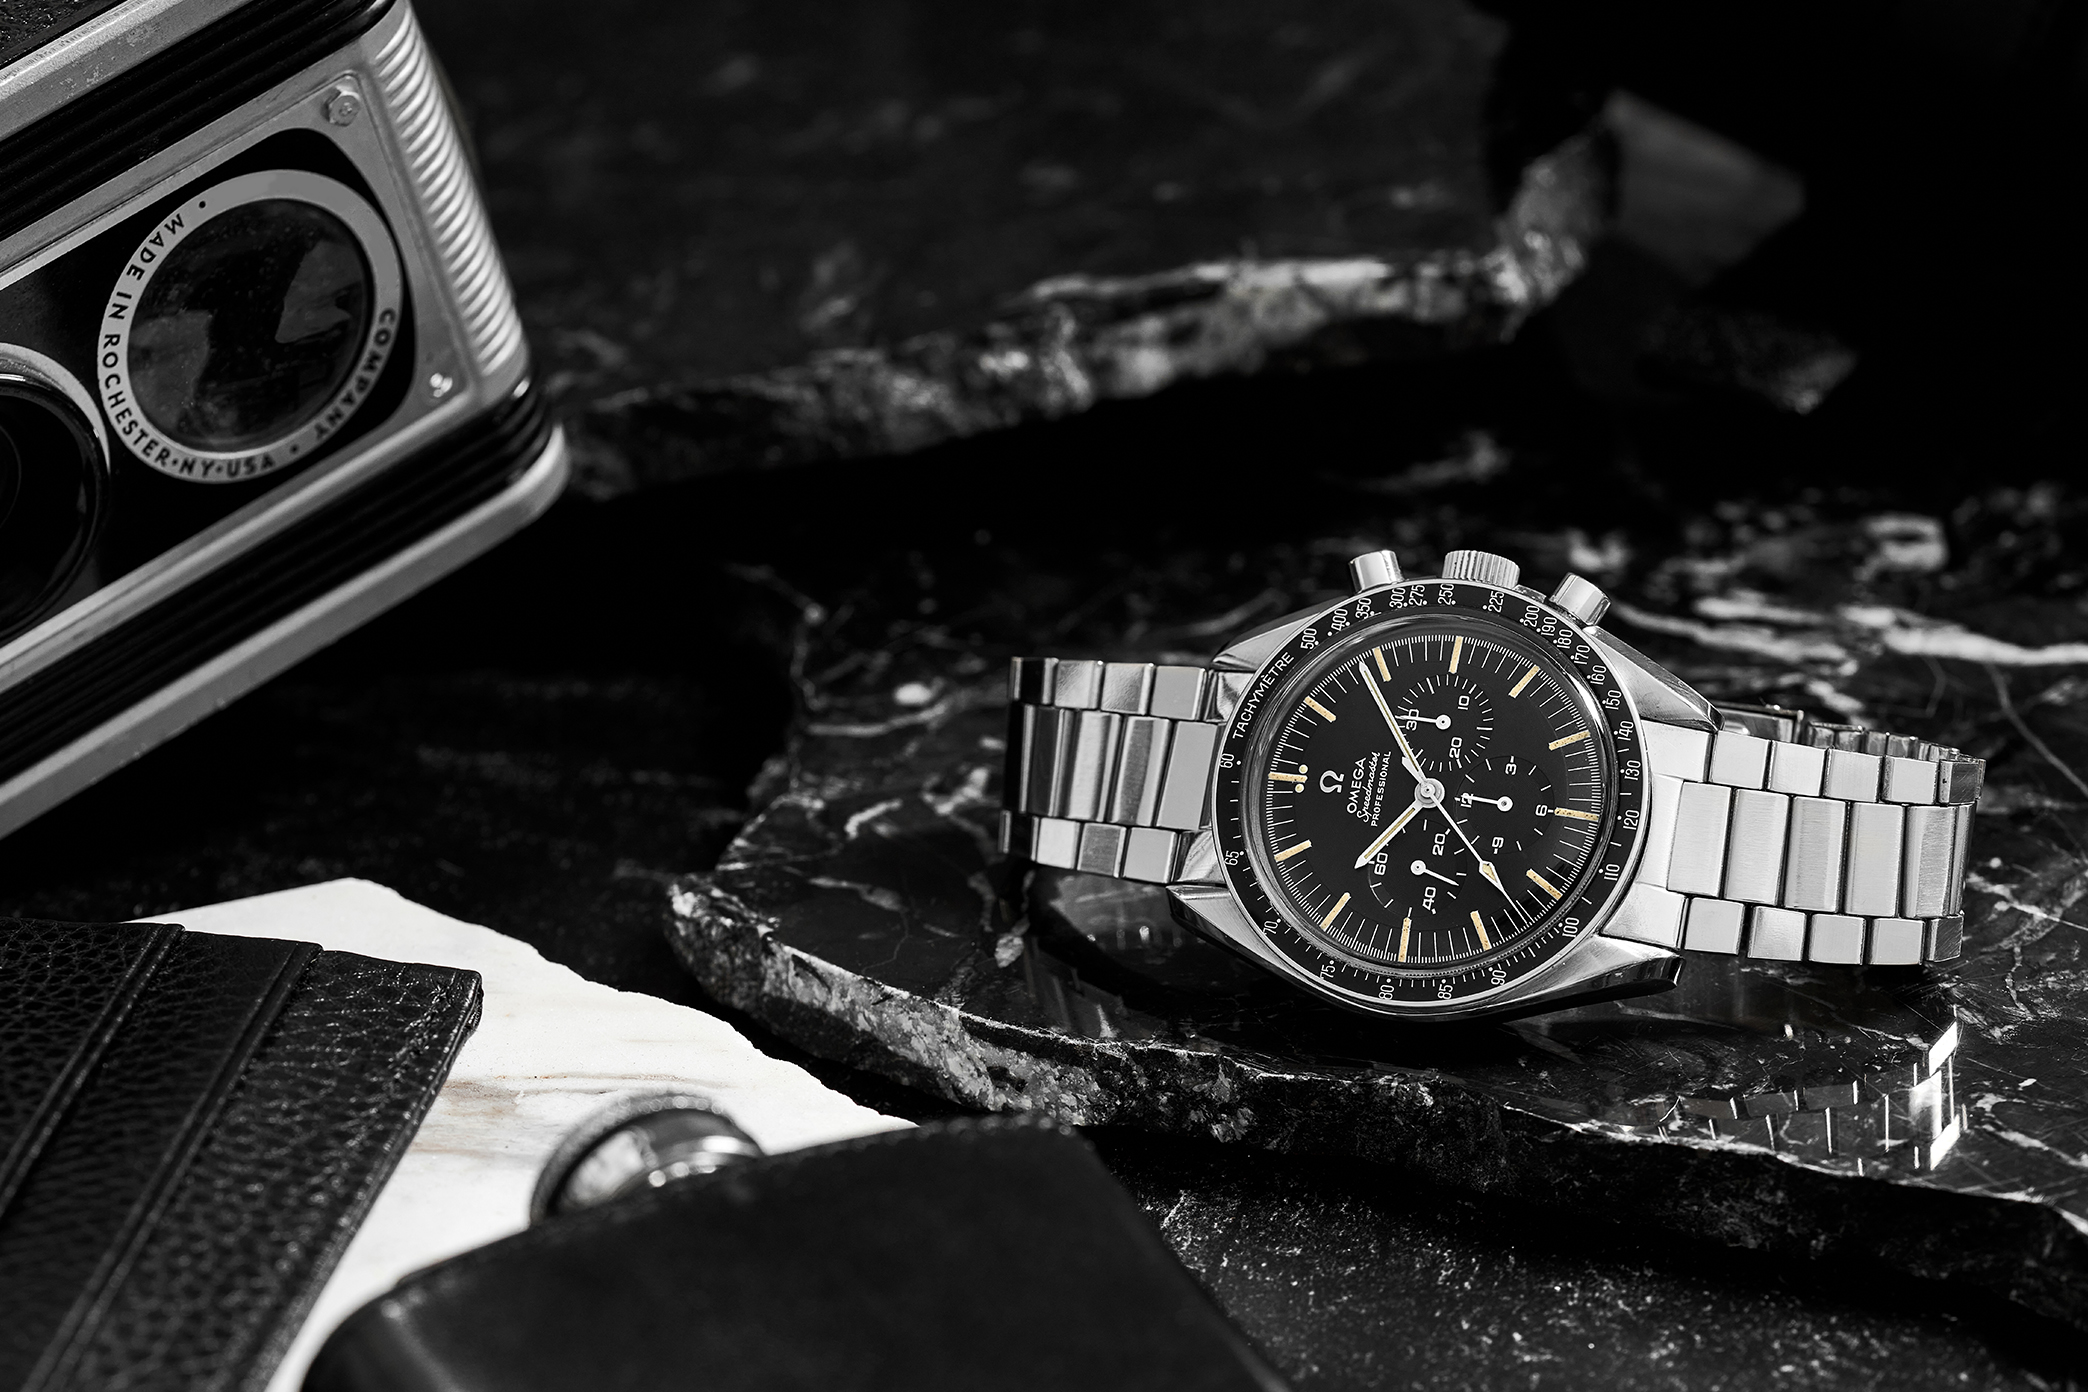 Vintage Watches: A 1960s Omega Speedmaster Professional, A 1960s